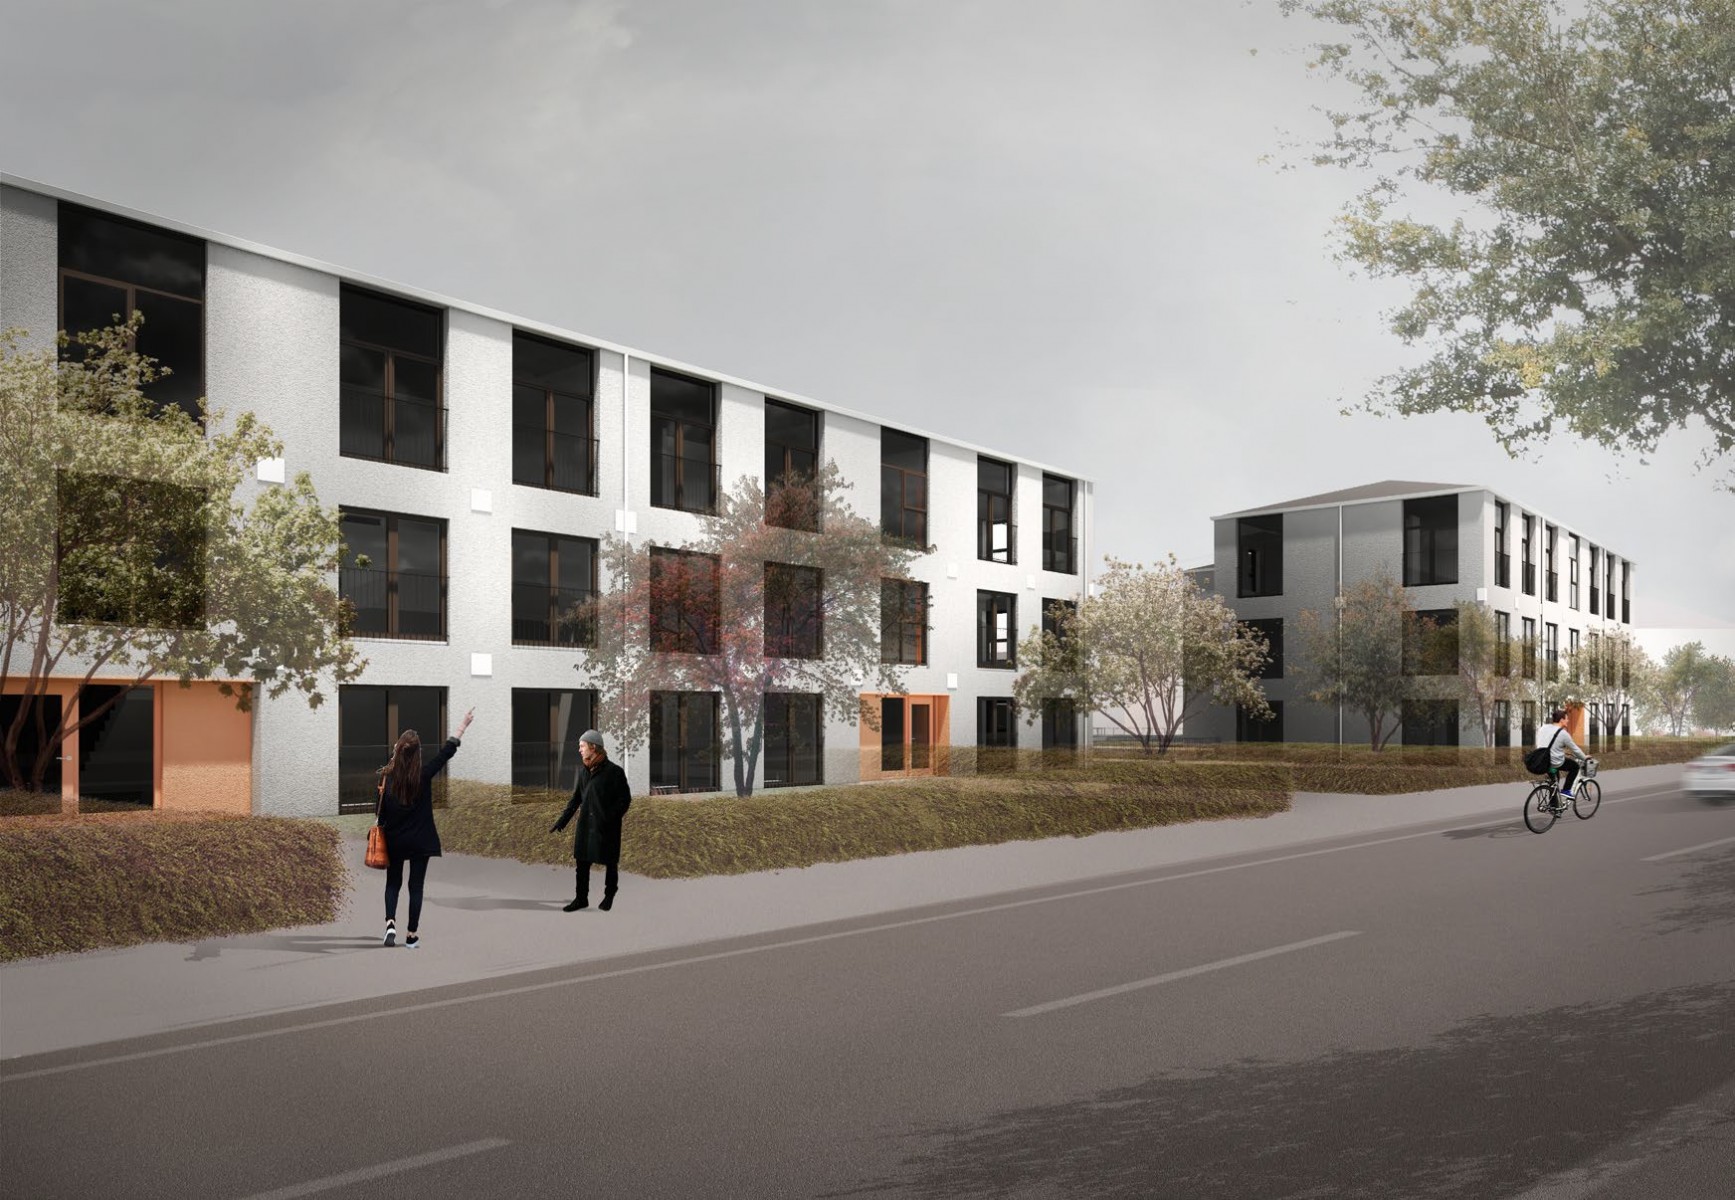 Glasgow school site acquisition paves way for 70-home planning submission